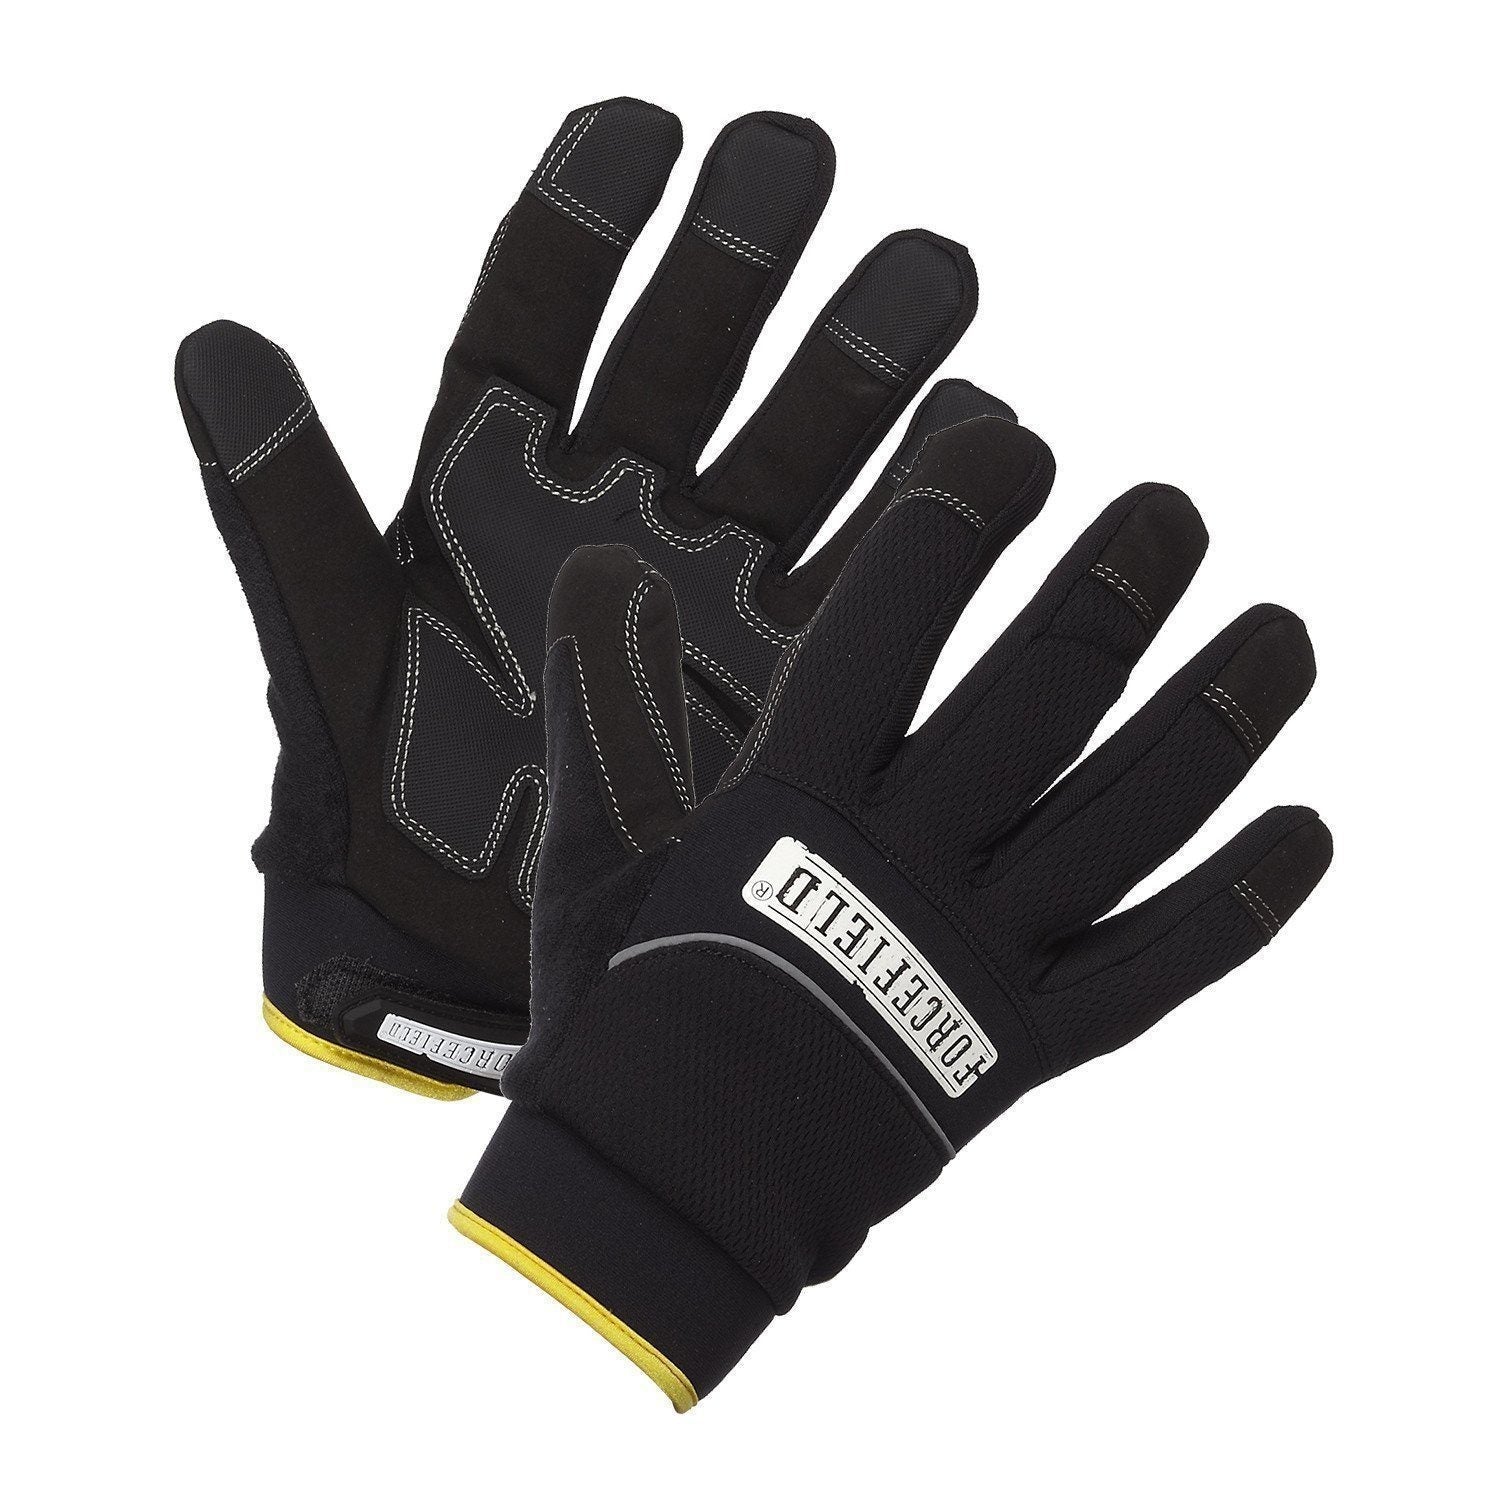 Waterproof Lined and Insulated Mechanic's Gloves - Hi Vis Safety